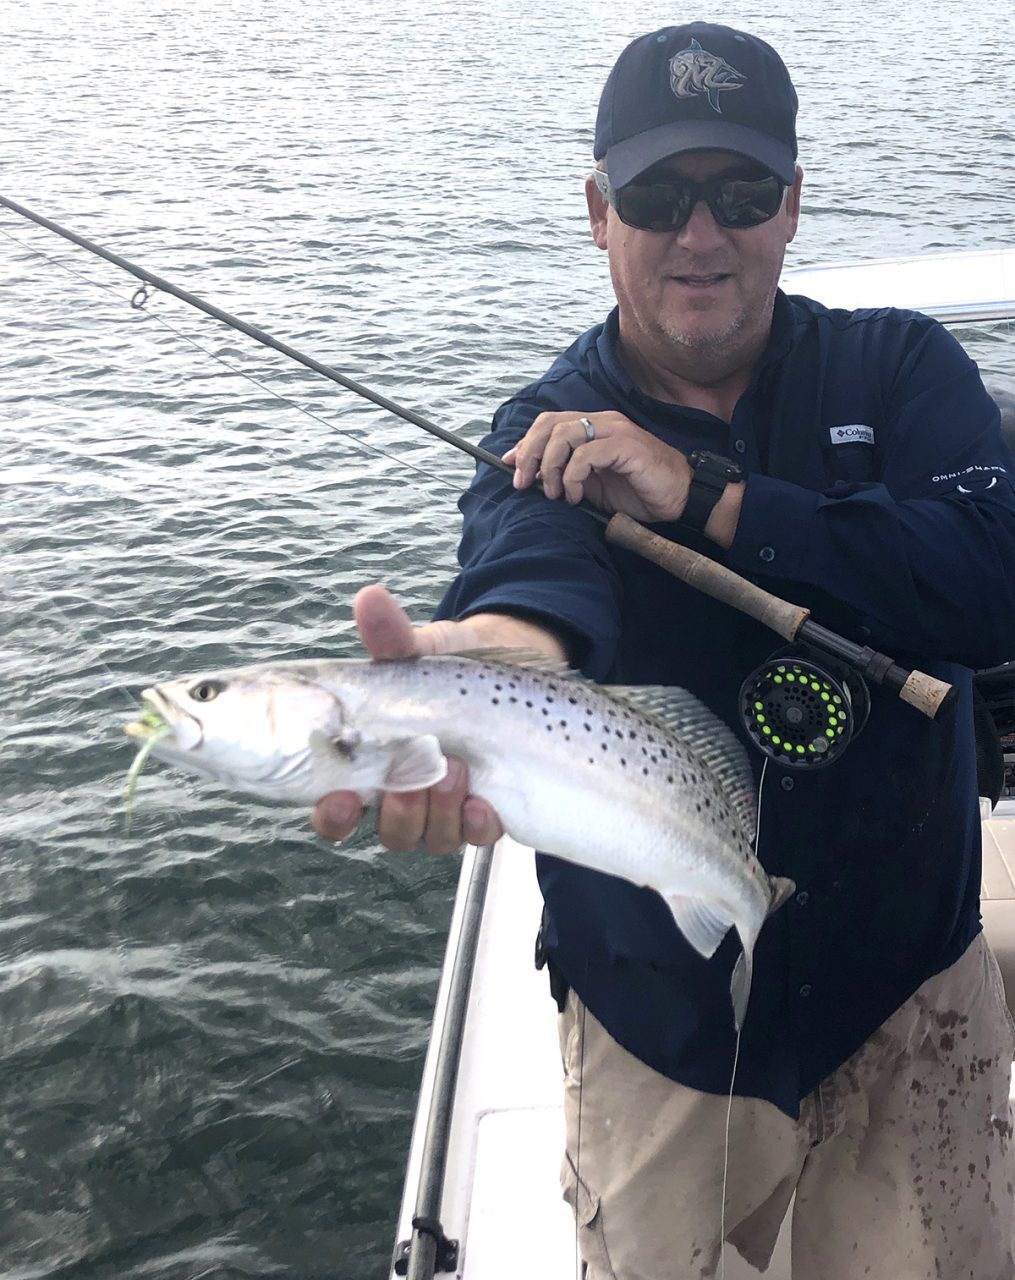 Capt Gordon with a healthy fall trout caught on sinking line. Photo: Gordon Churchill